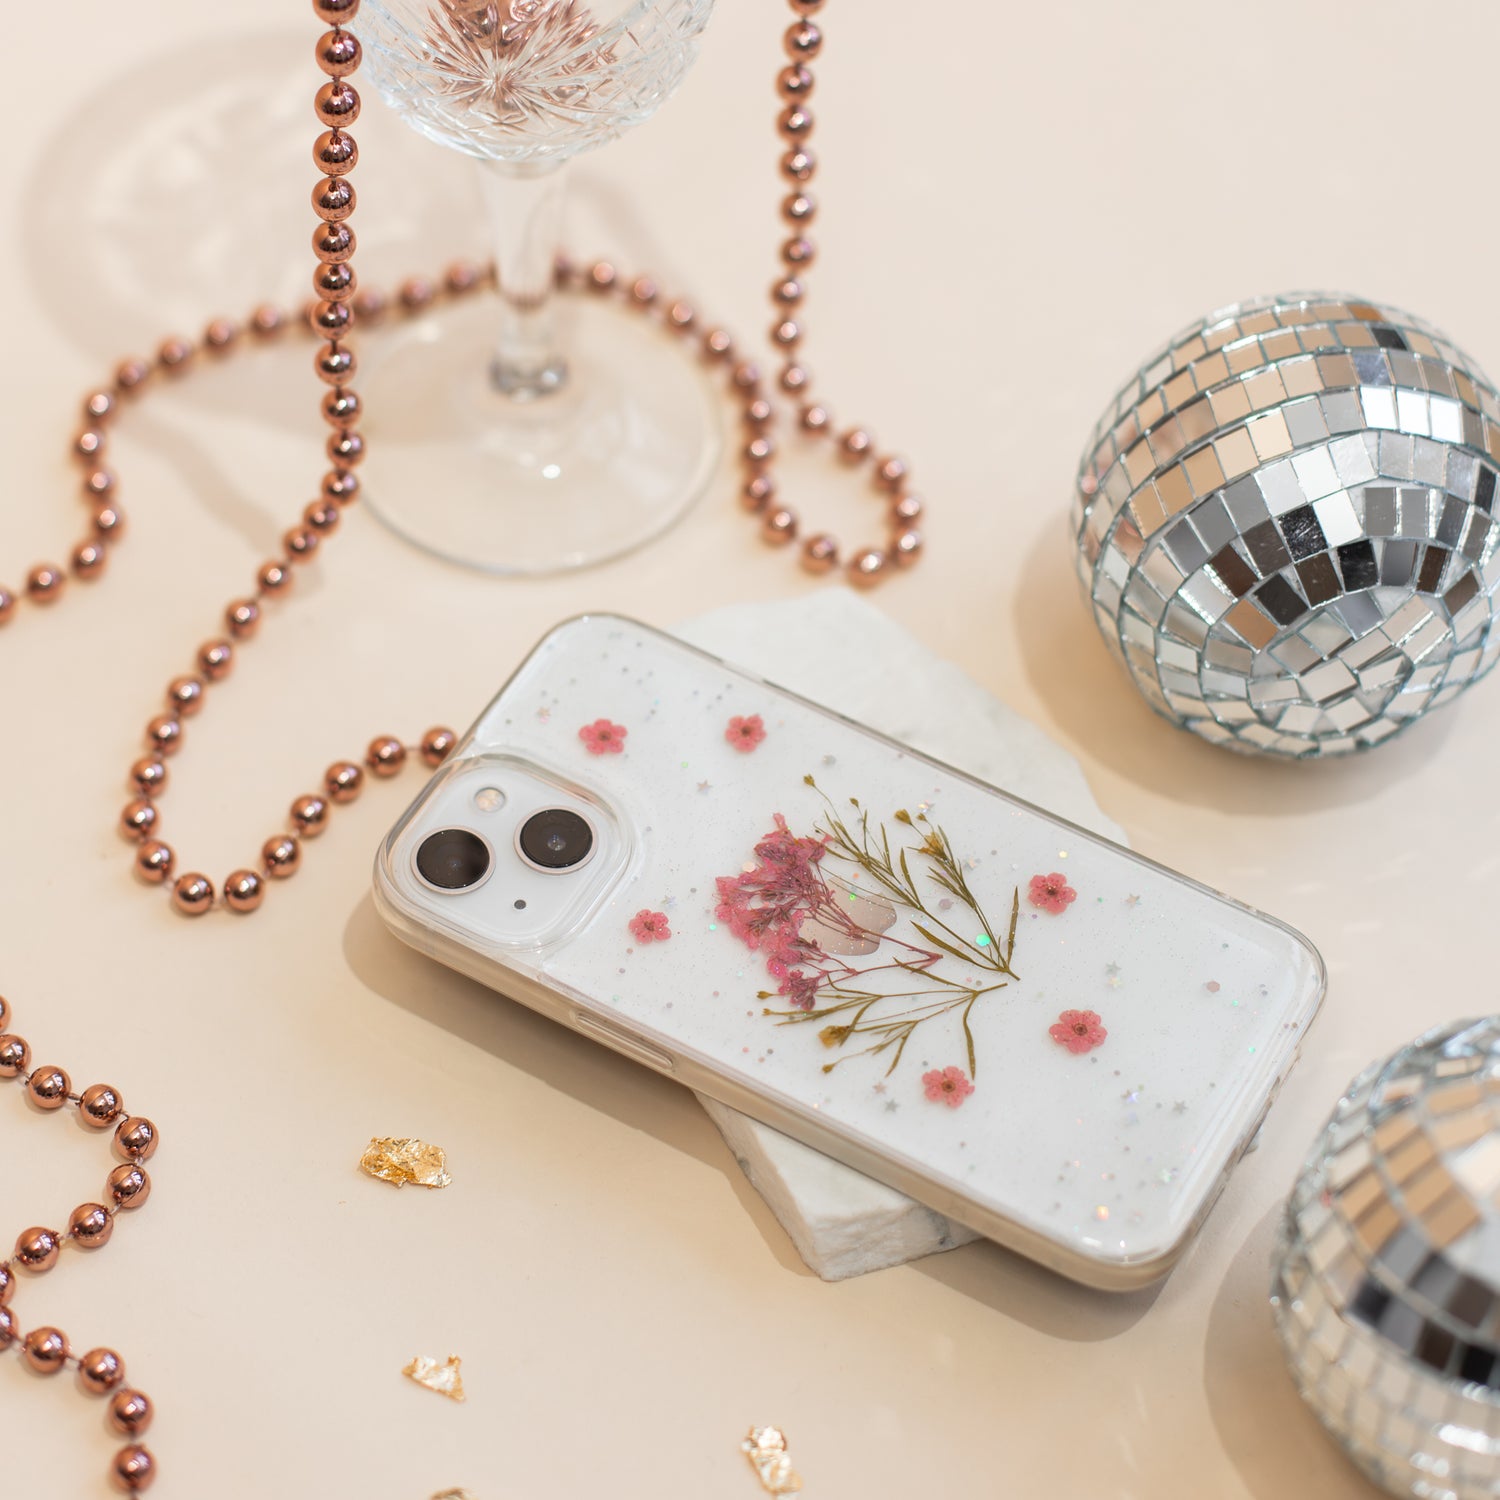 Blossom Dried Flowers phone case